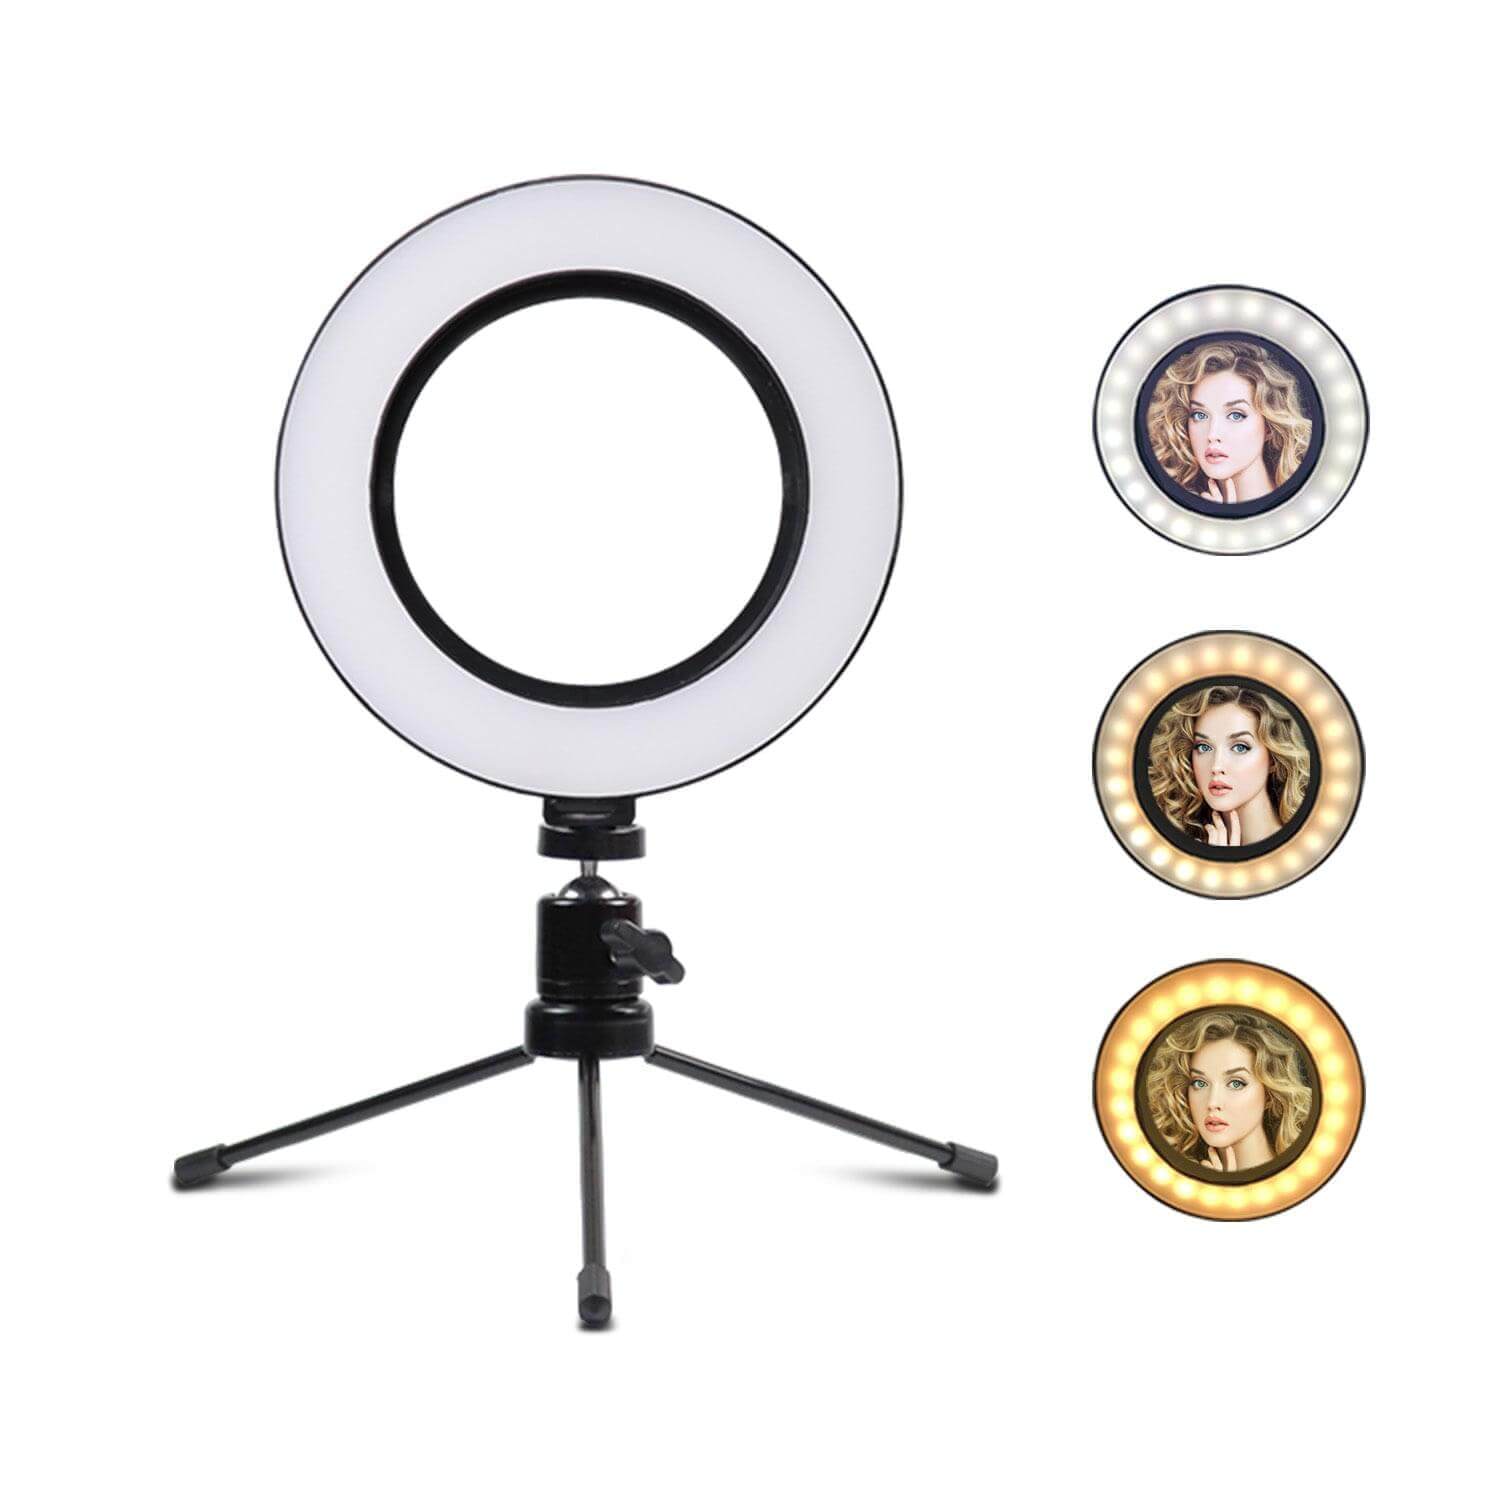 16 CM PROFESSIONAL LED SELFIE RING LIGHT WITH MINI TRIPOD STAND